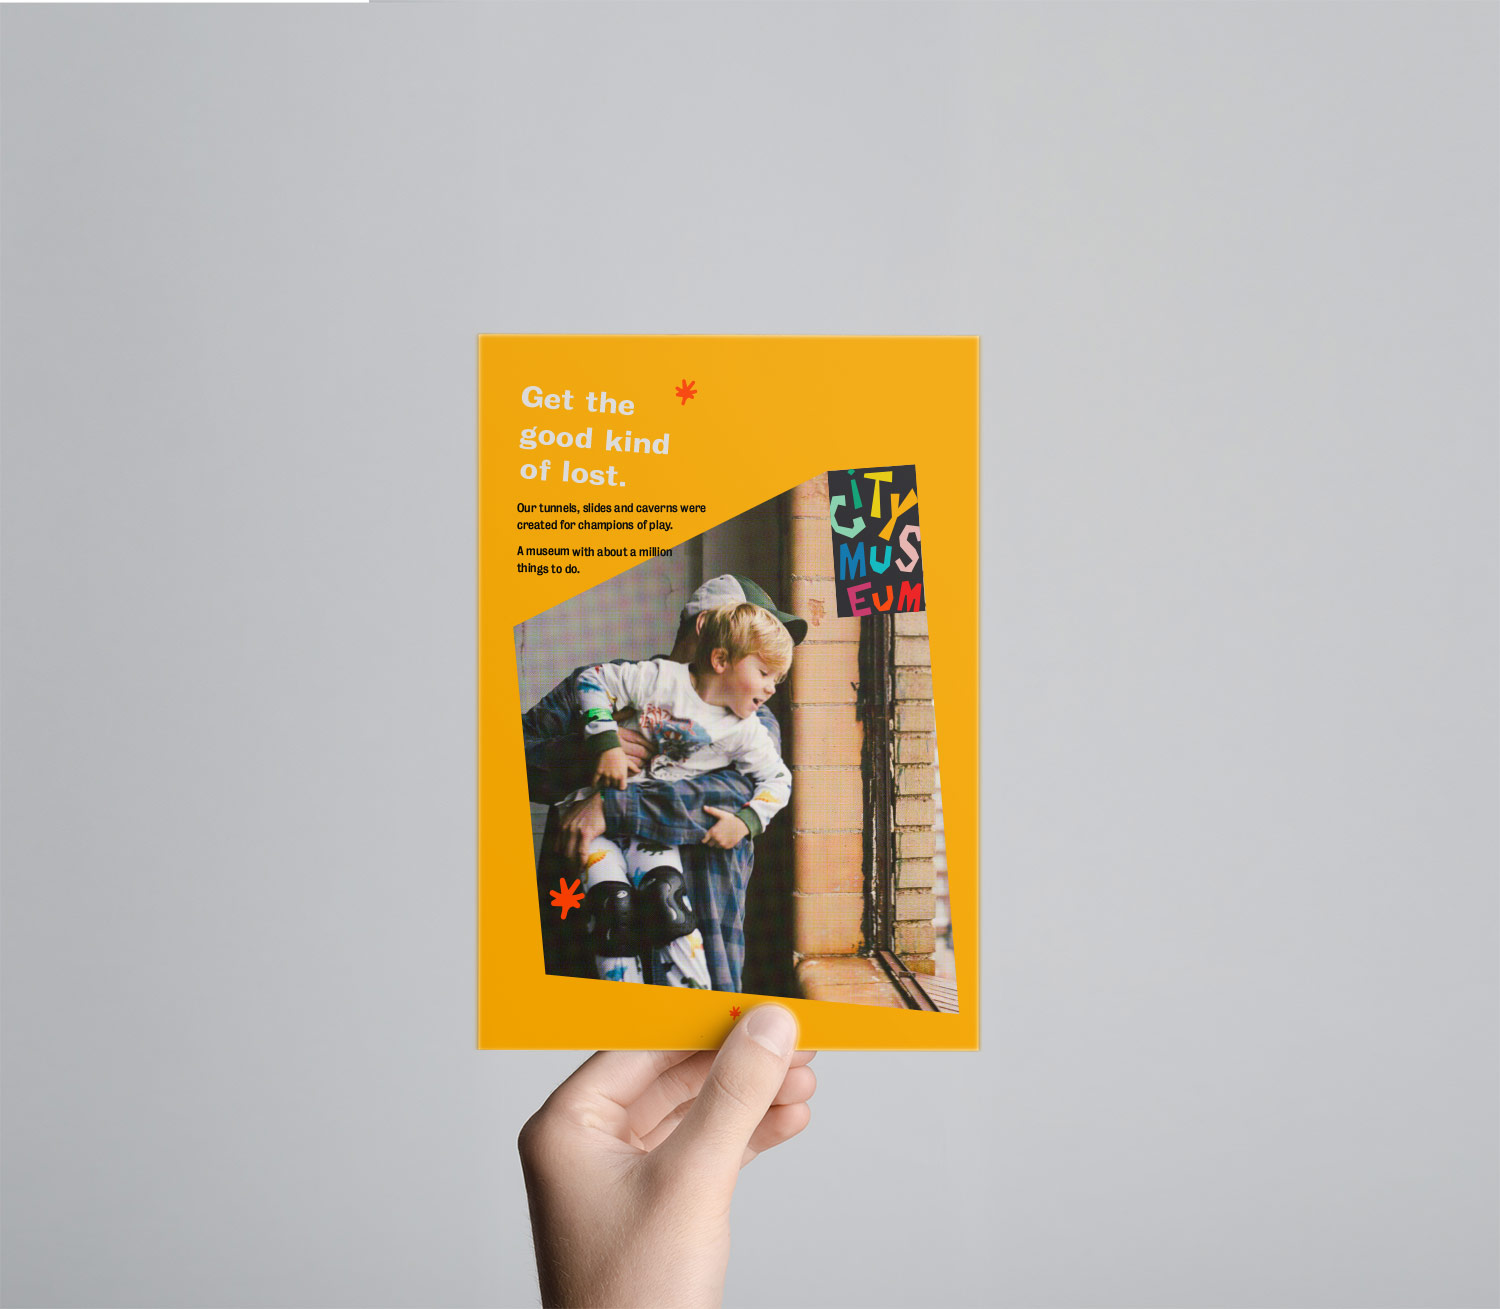 A direct mailer reflecting City Museum's new branding